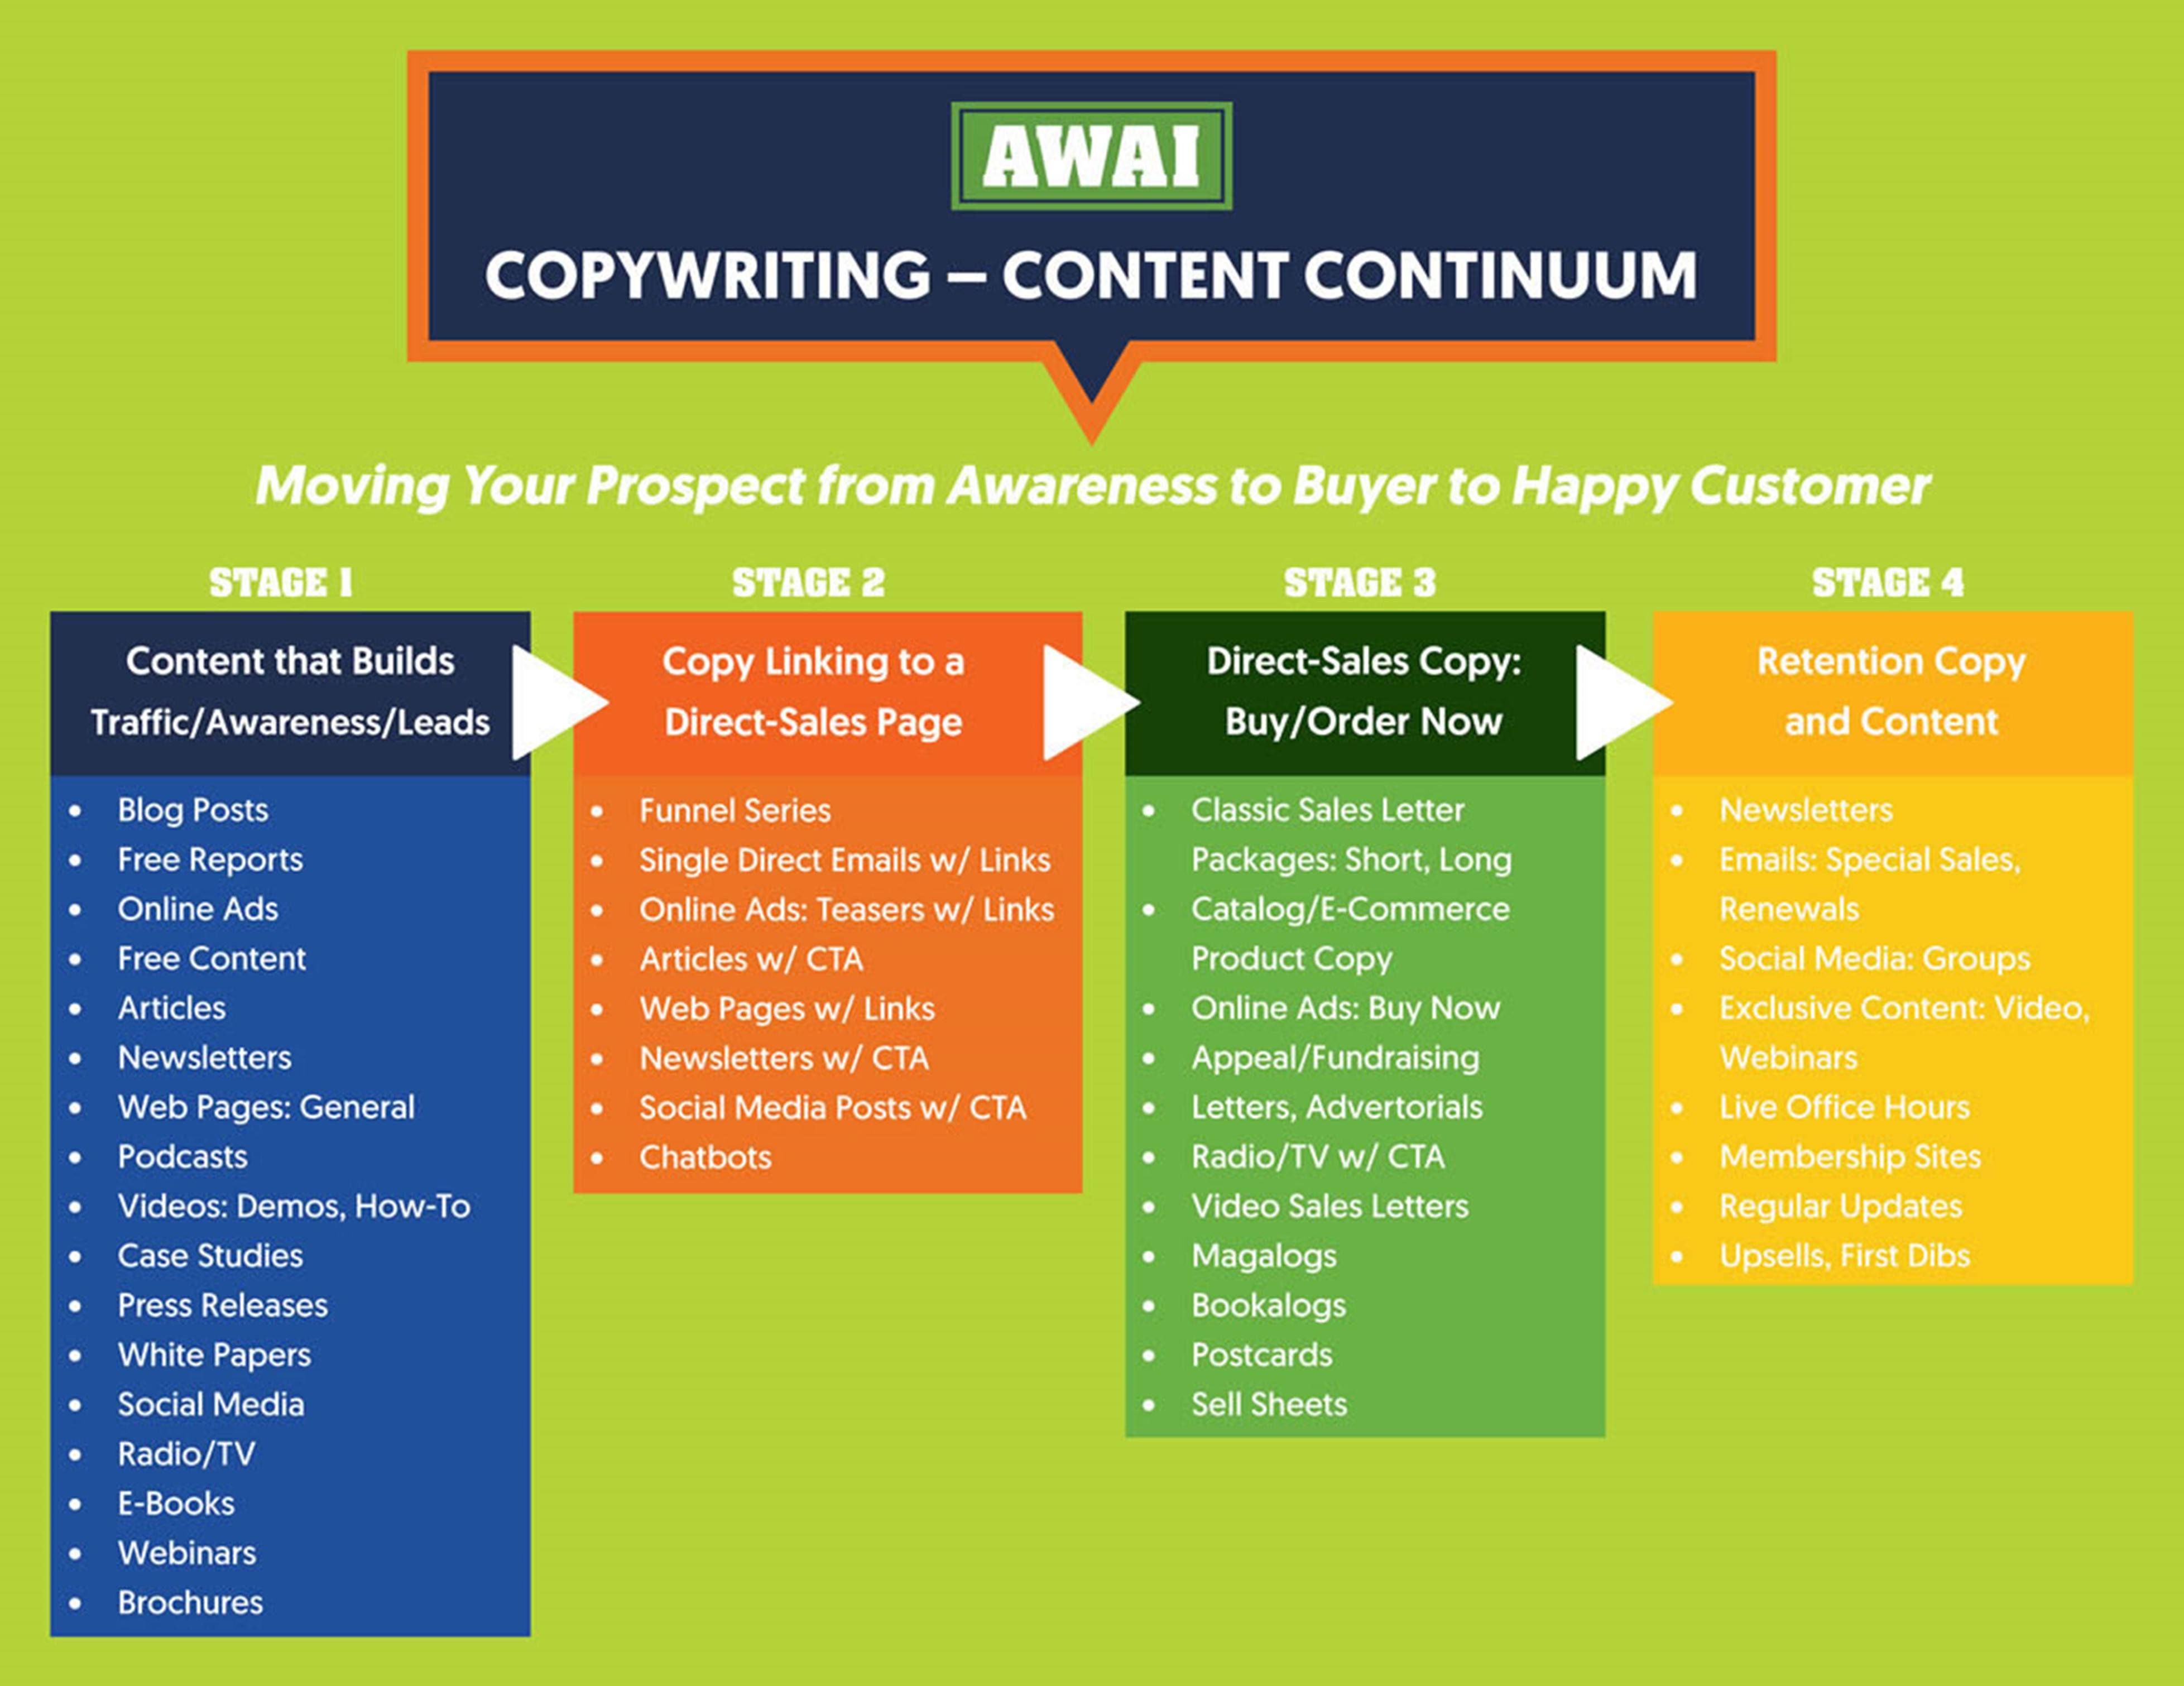 AWAI's Copywriting content continuum: stage 1 (content that builds traffic/awareness/leads), stage 2 (copy linking to a direct-sales page), stage 3 (direct-sales copy: buy/order now), and stage 4 (retention copy and content)